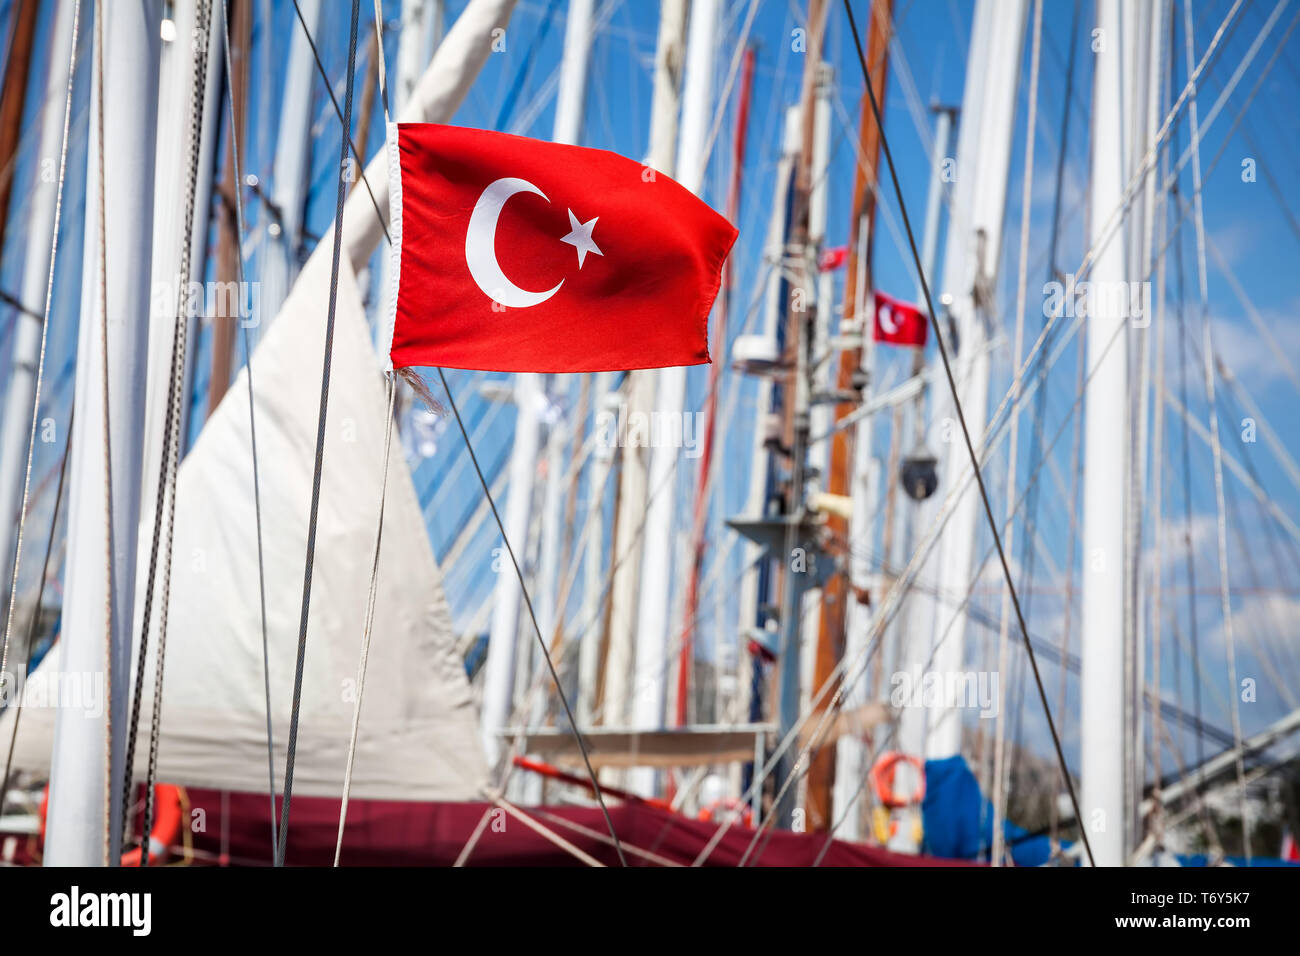 Turkey flag on the boat at hot sunny day in Bodrum Marina Stock Photo